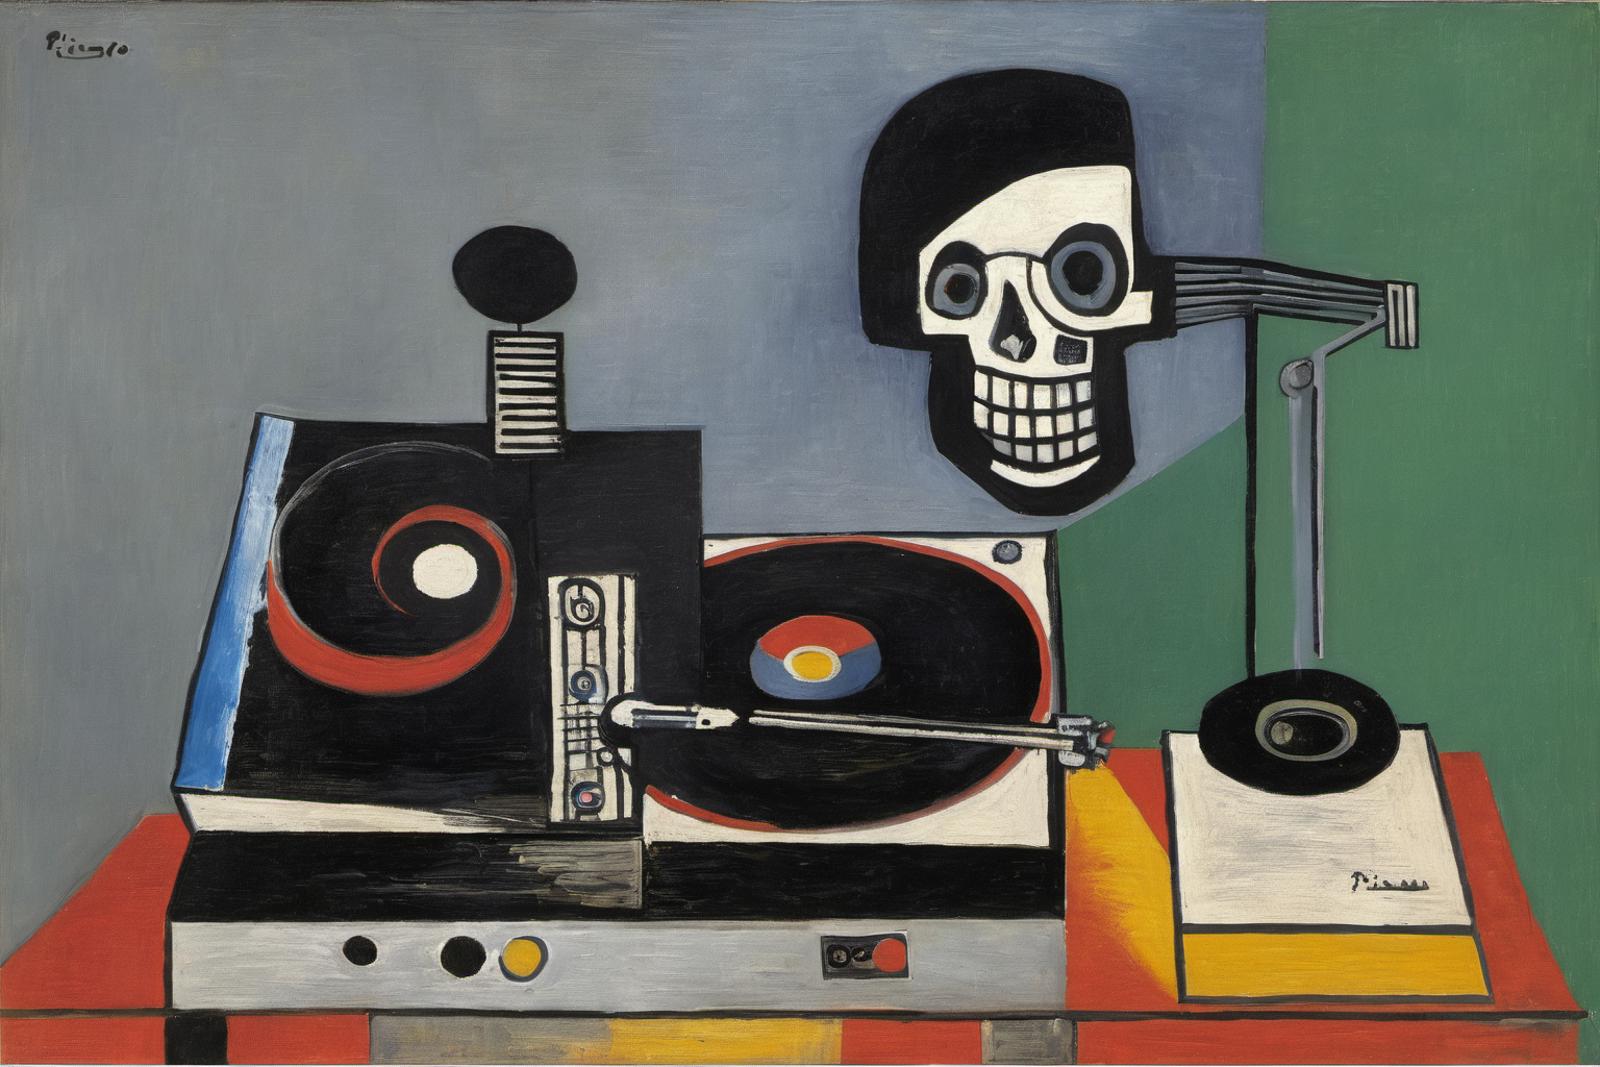 A painting of a record player, turntable, and skull with glasses on it.